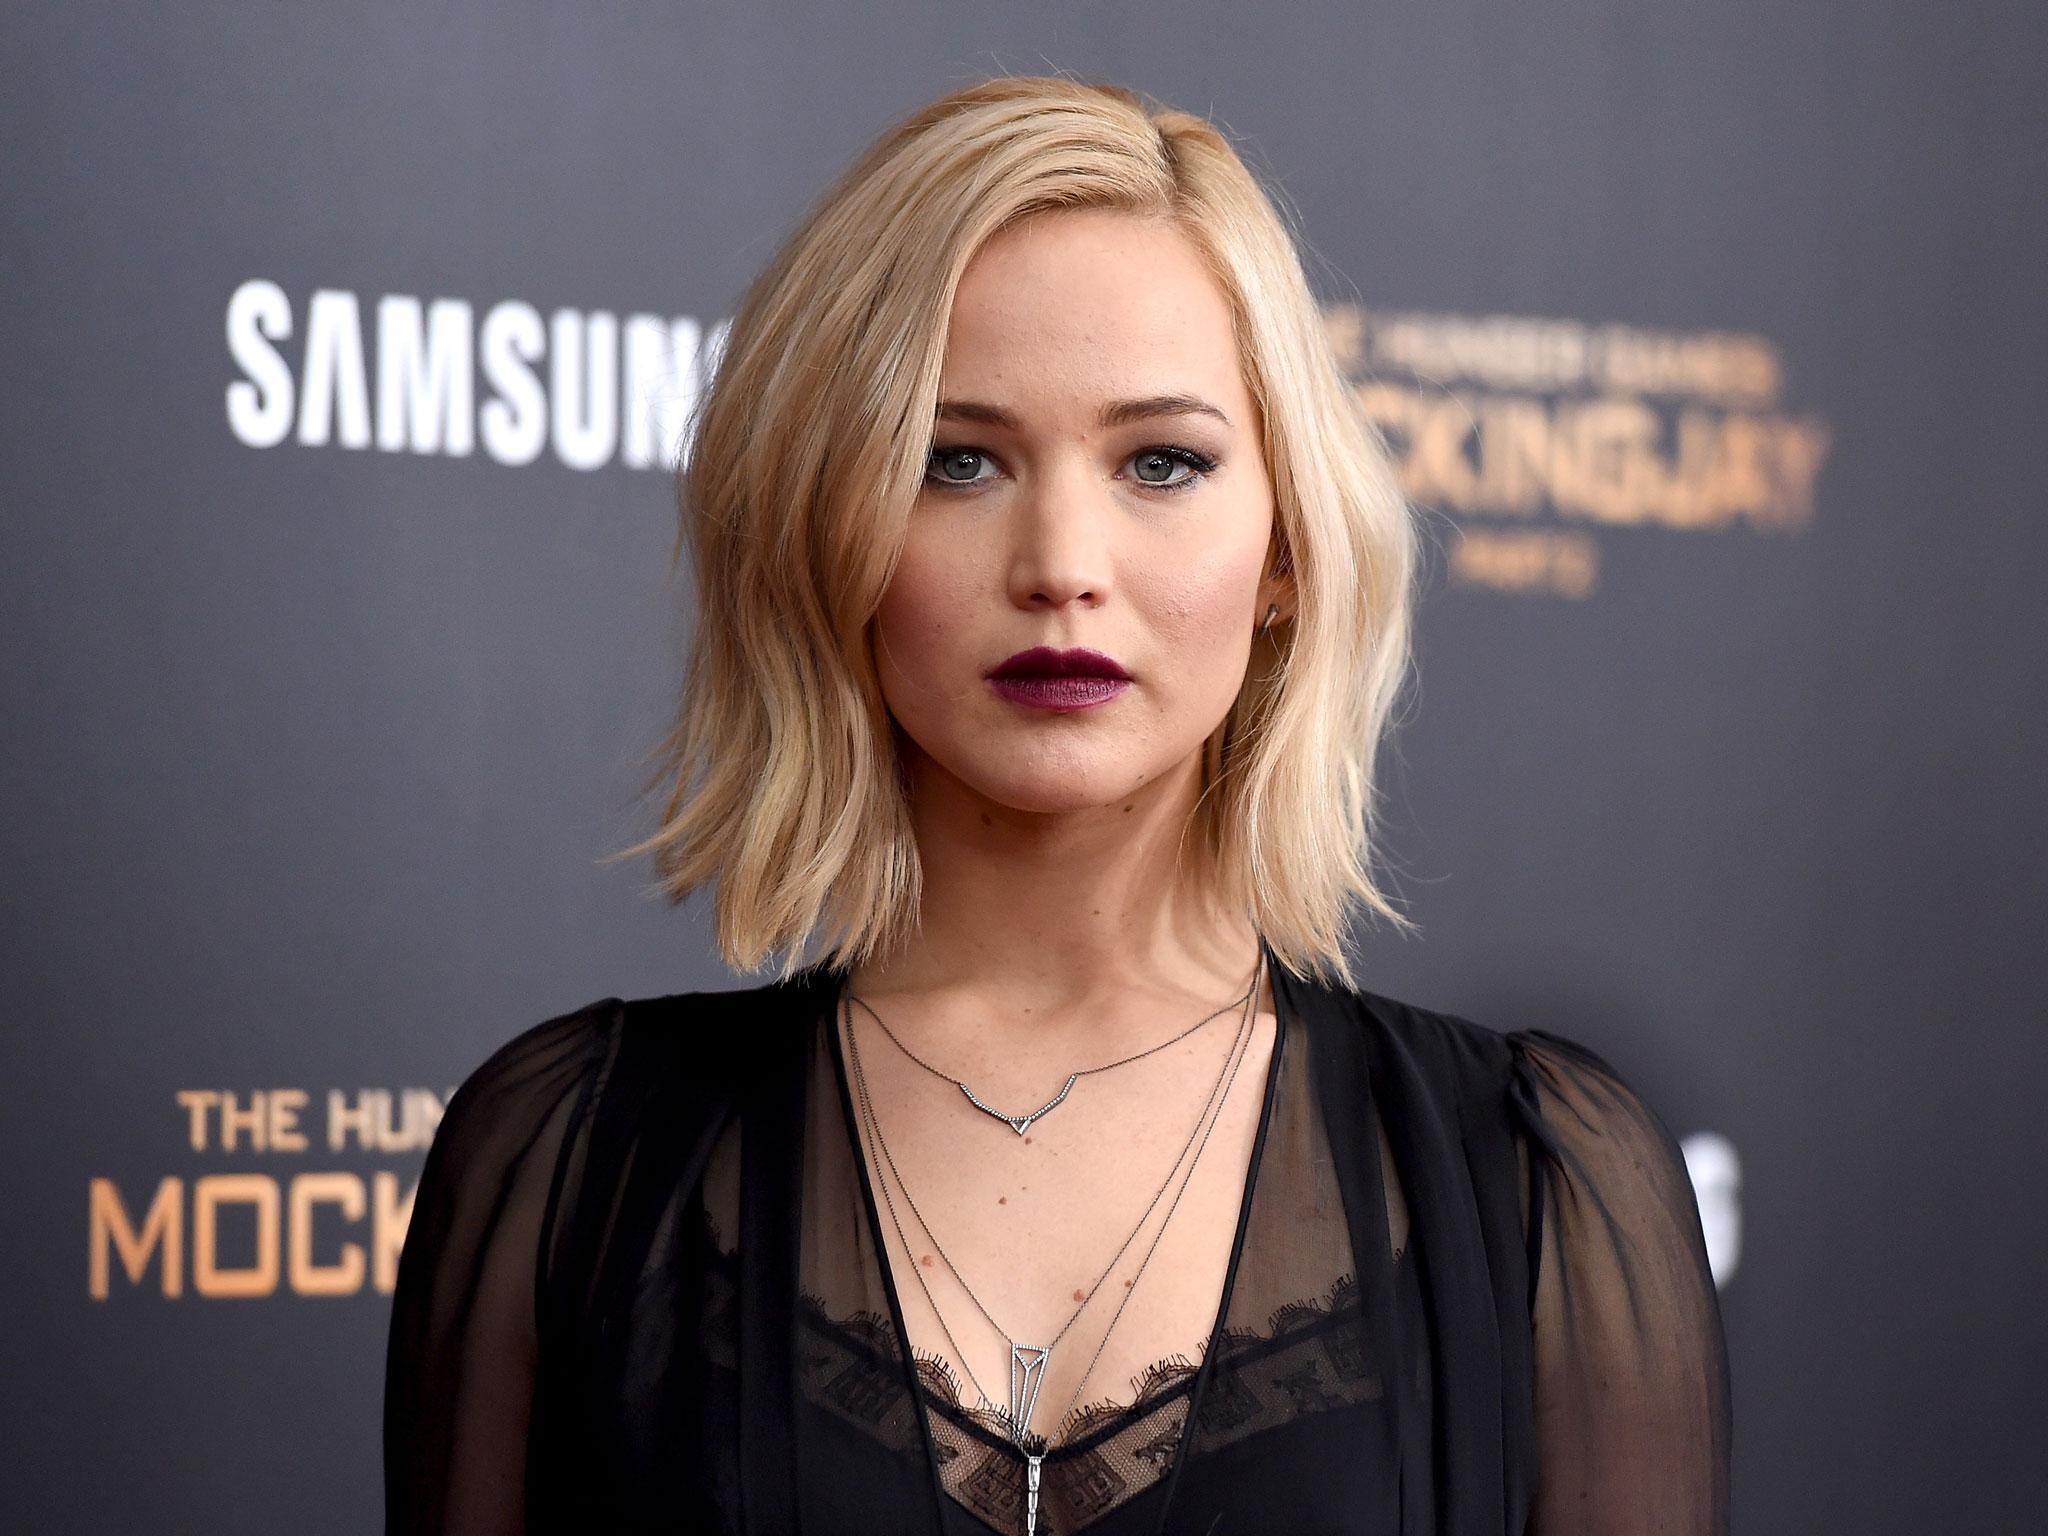 brian chaplain recommends jennifer lawrence sex scandal pic